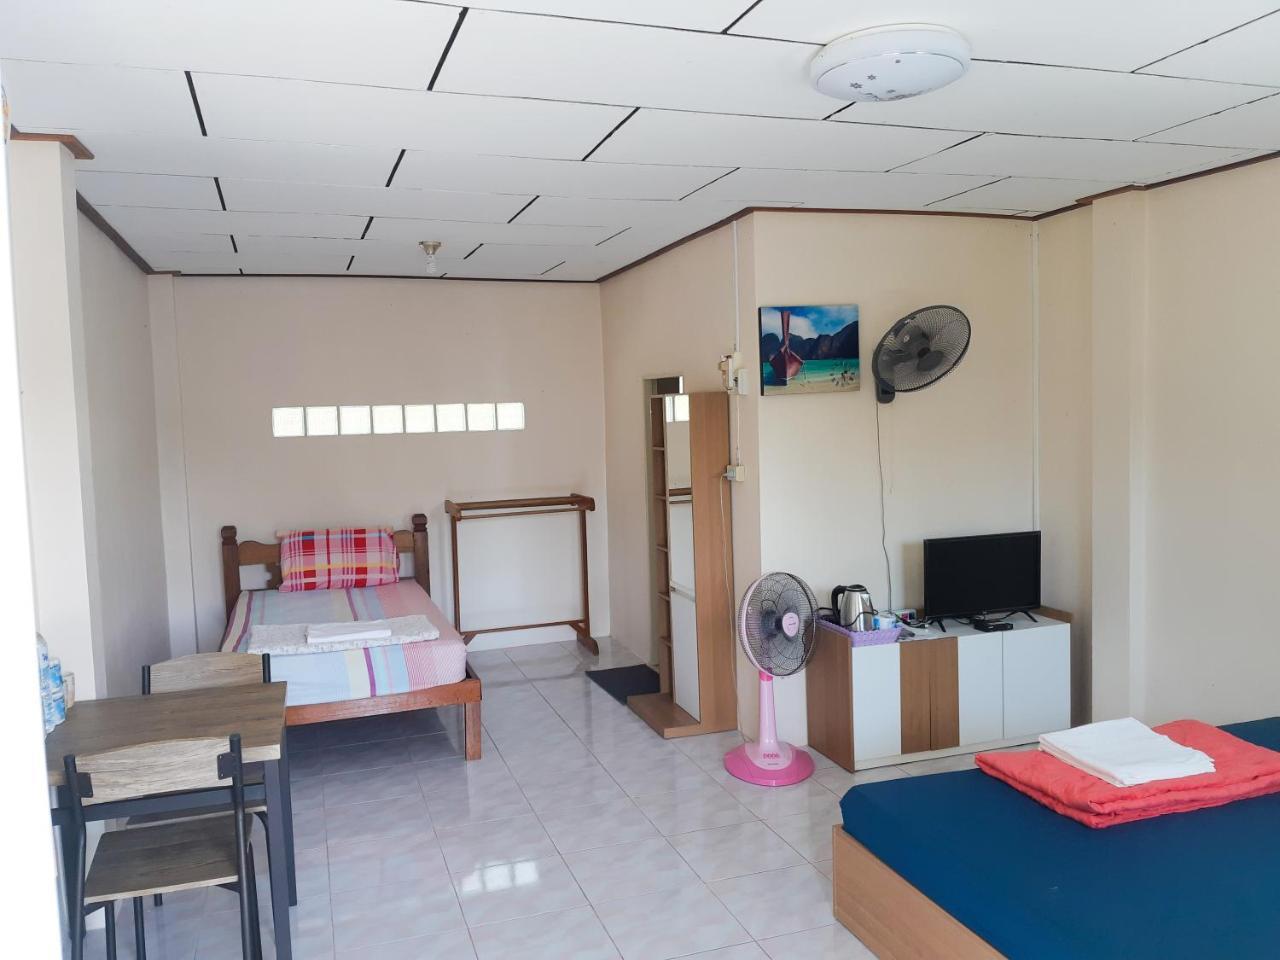 T And T House (Adults Only) Hotel Koh Phayam Bagian luar foto